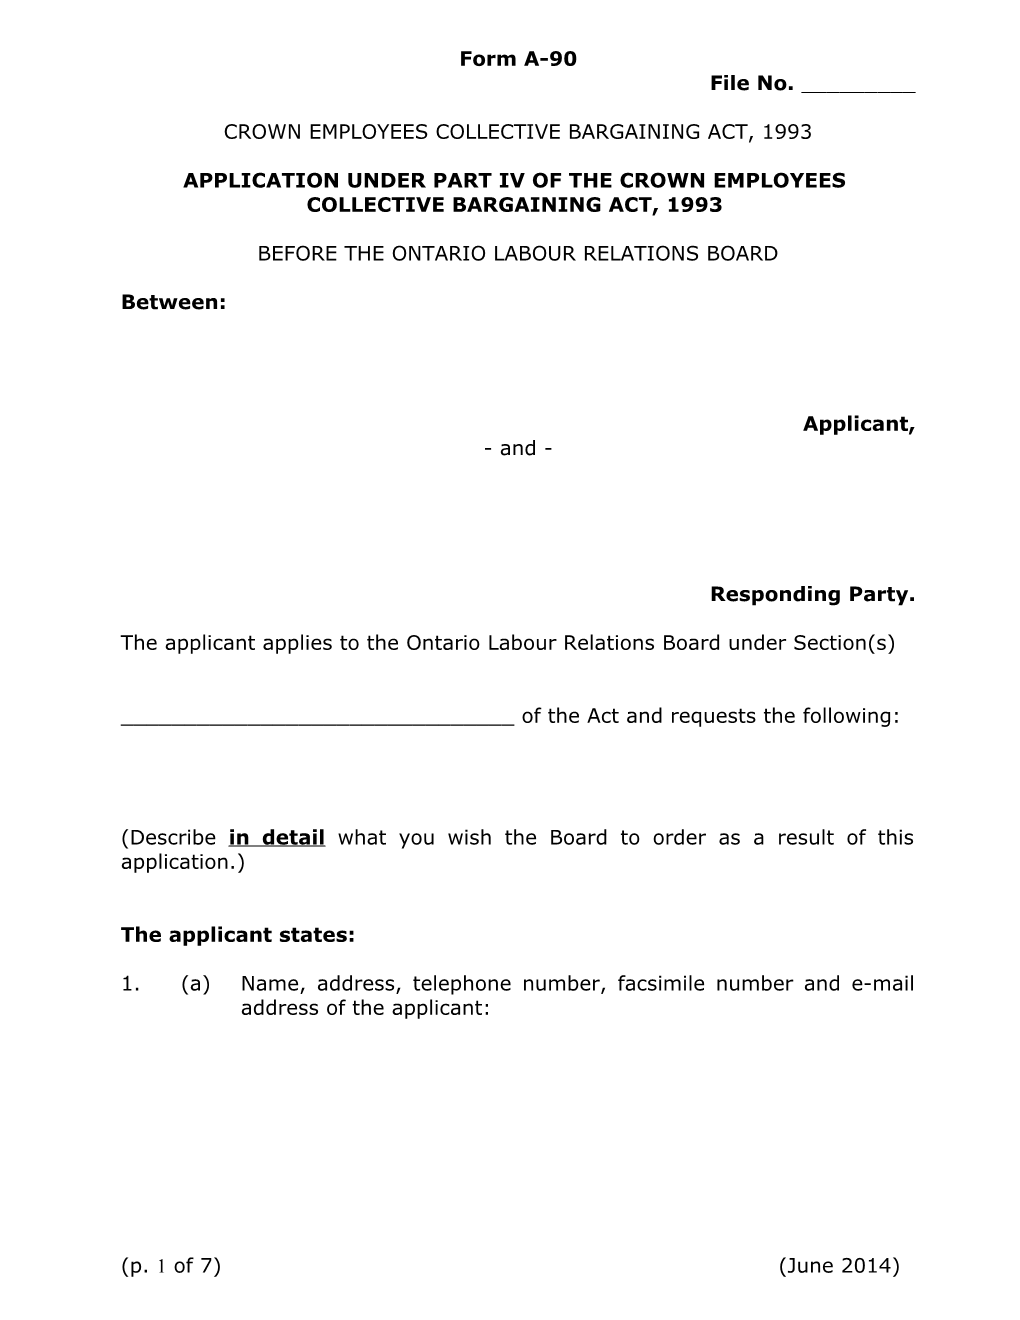 Application Under Part Iv of the Crown Employees Collective Bargaining Act, 1993